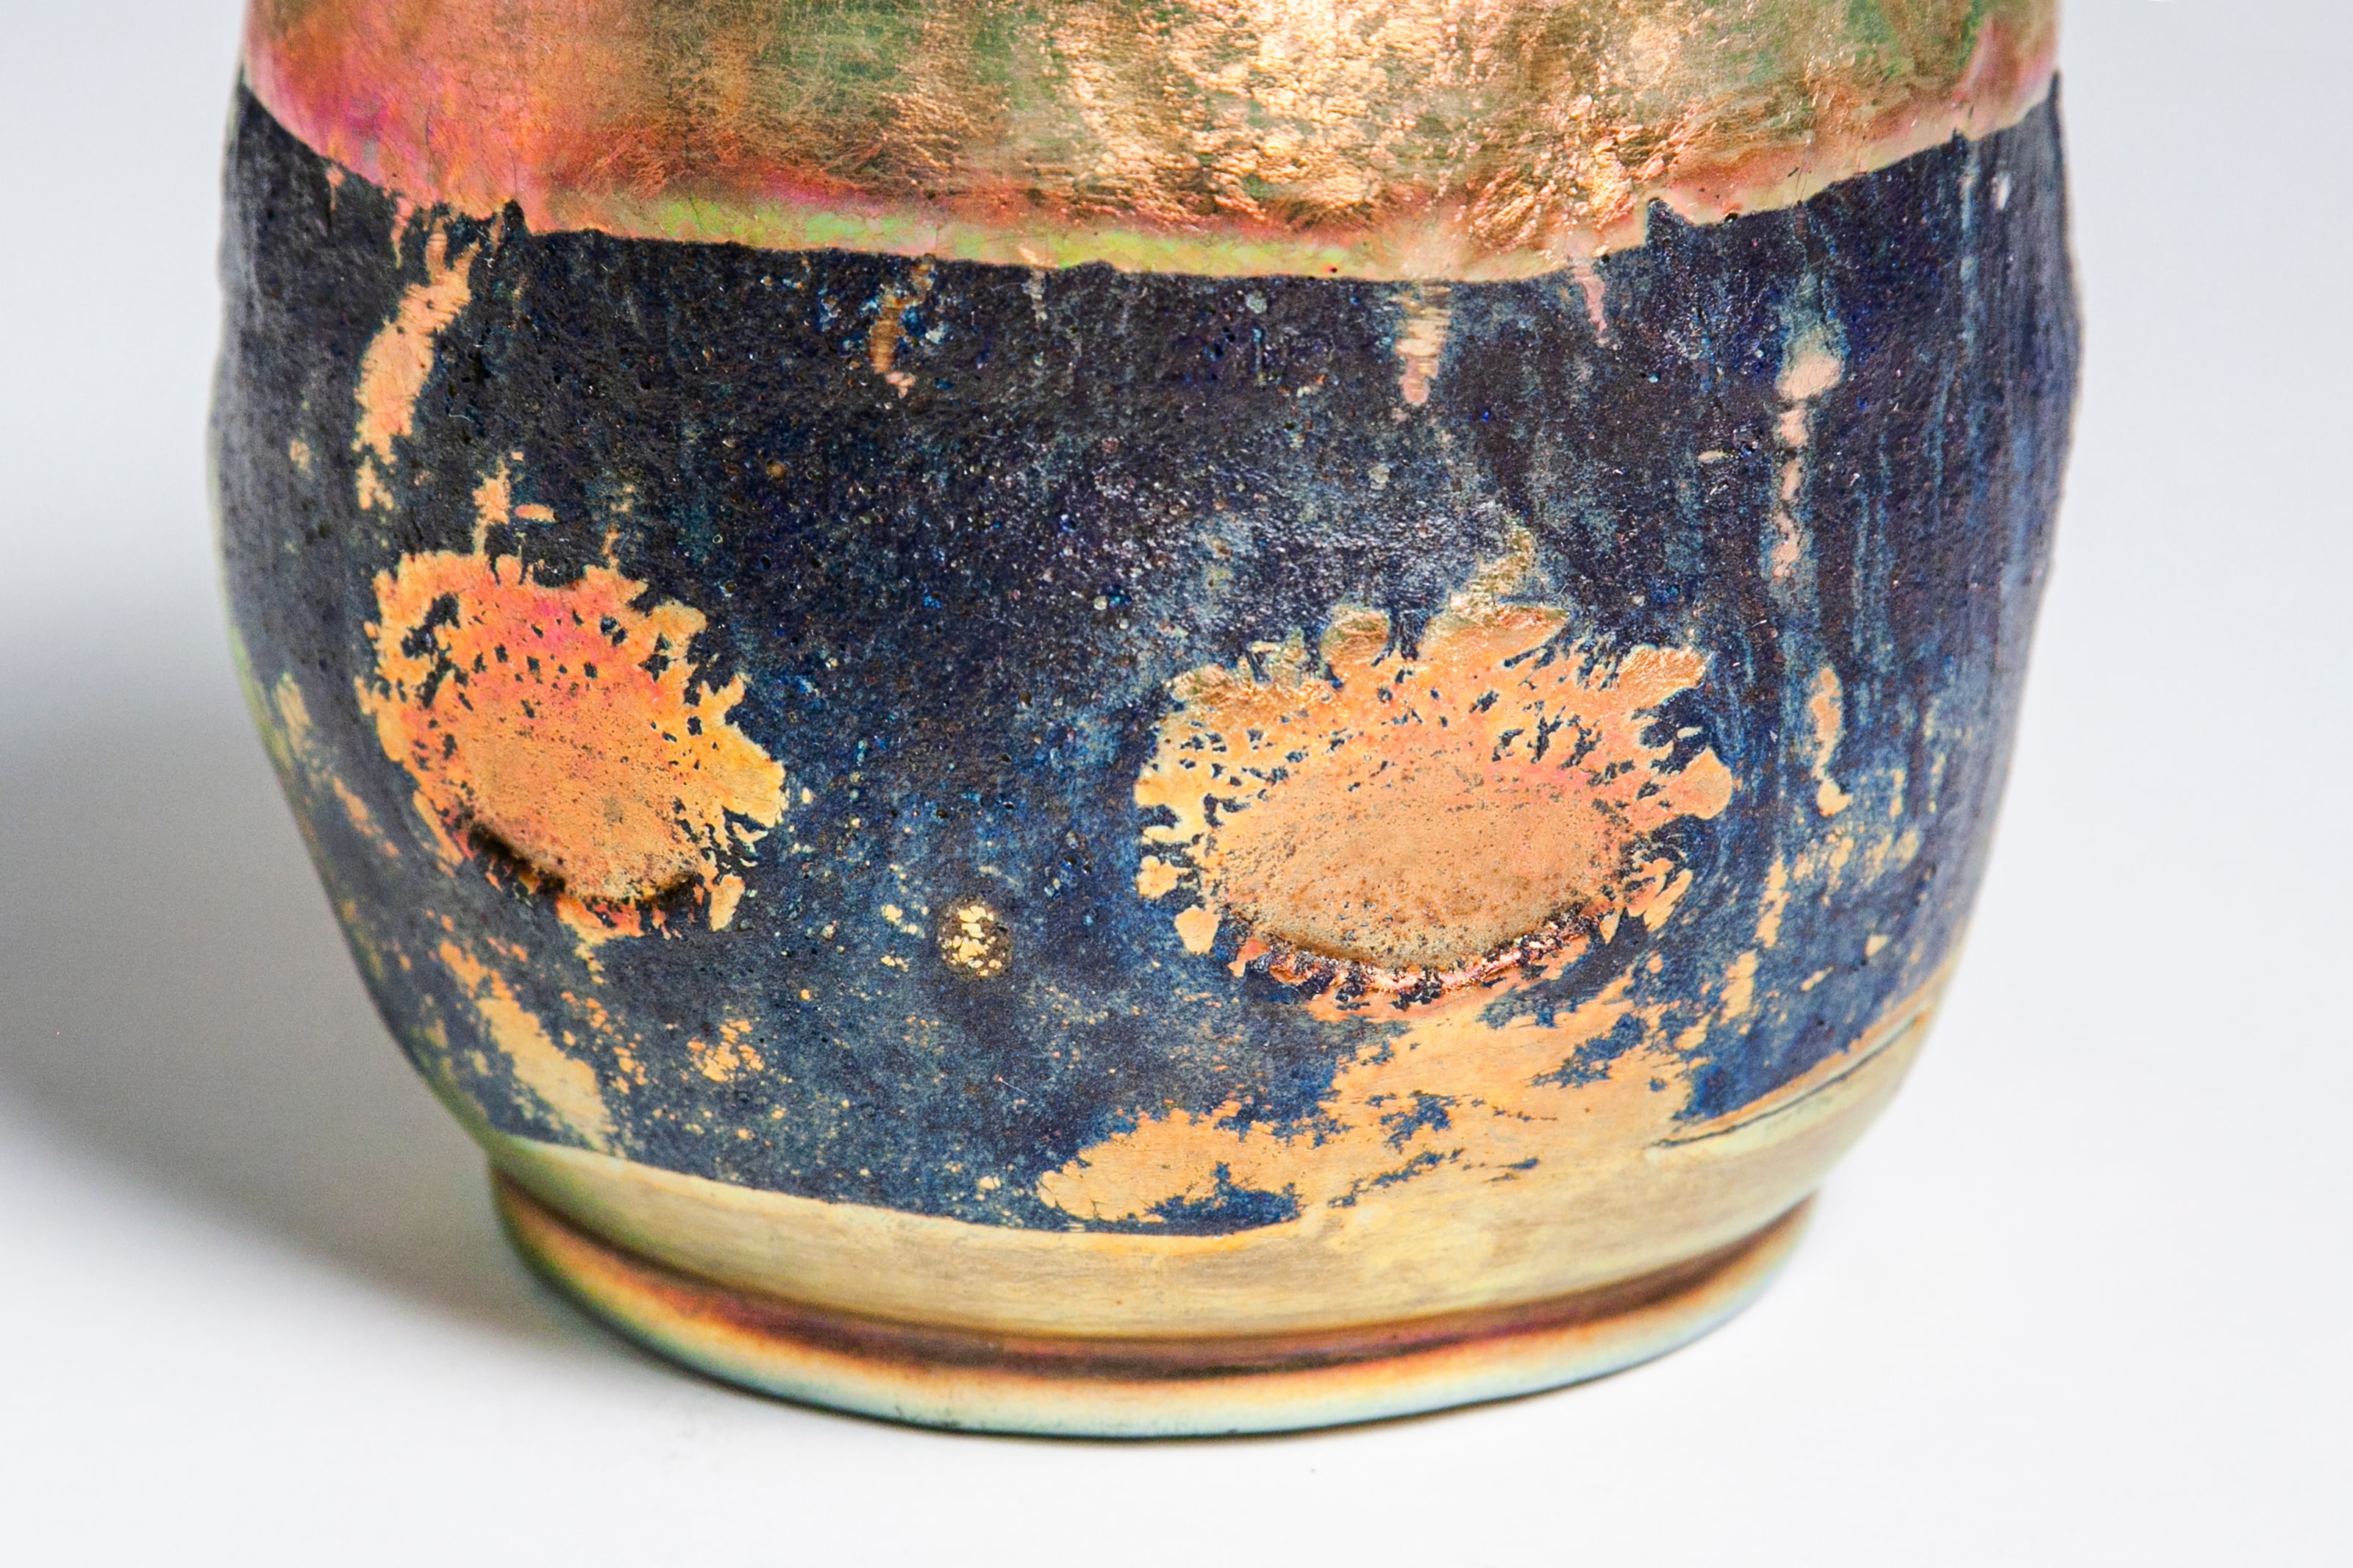 A detail shot showing the droplets of gold iridescent tiffany glass that form a row of polka dots on the rare tiffany lava vase.